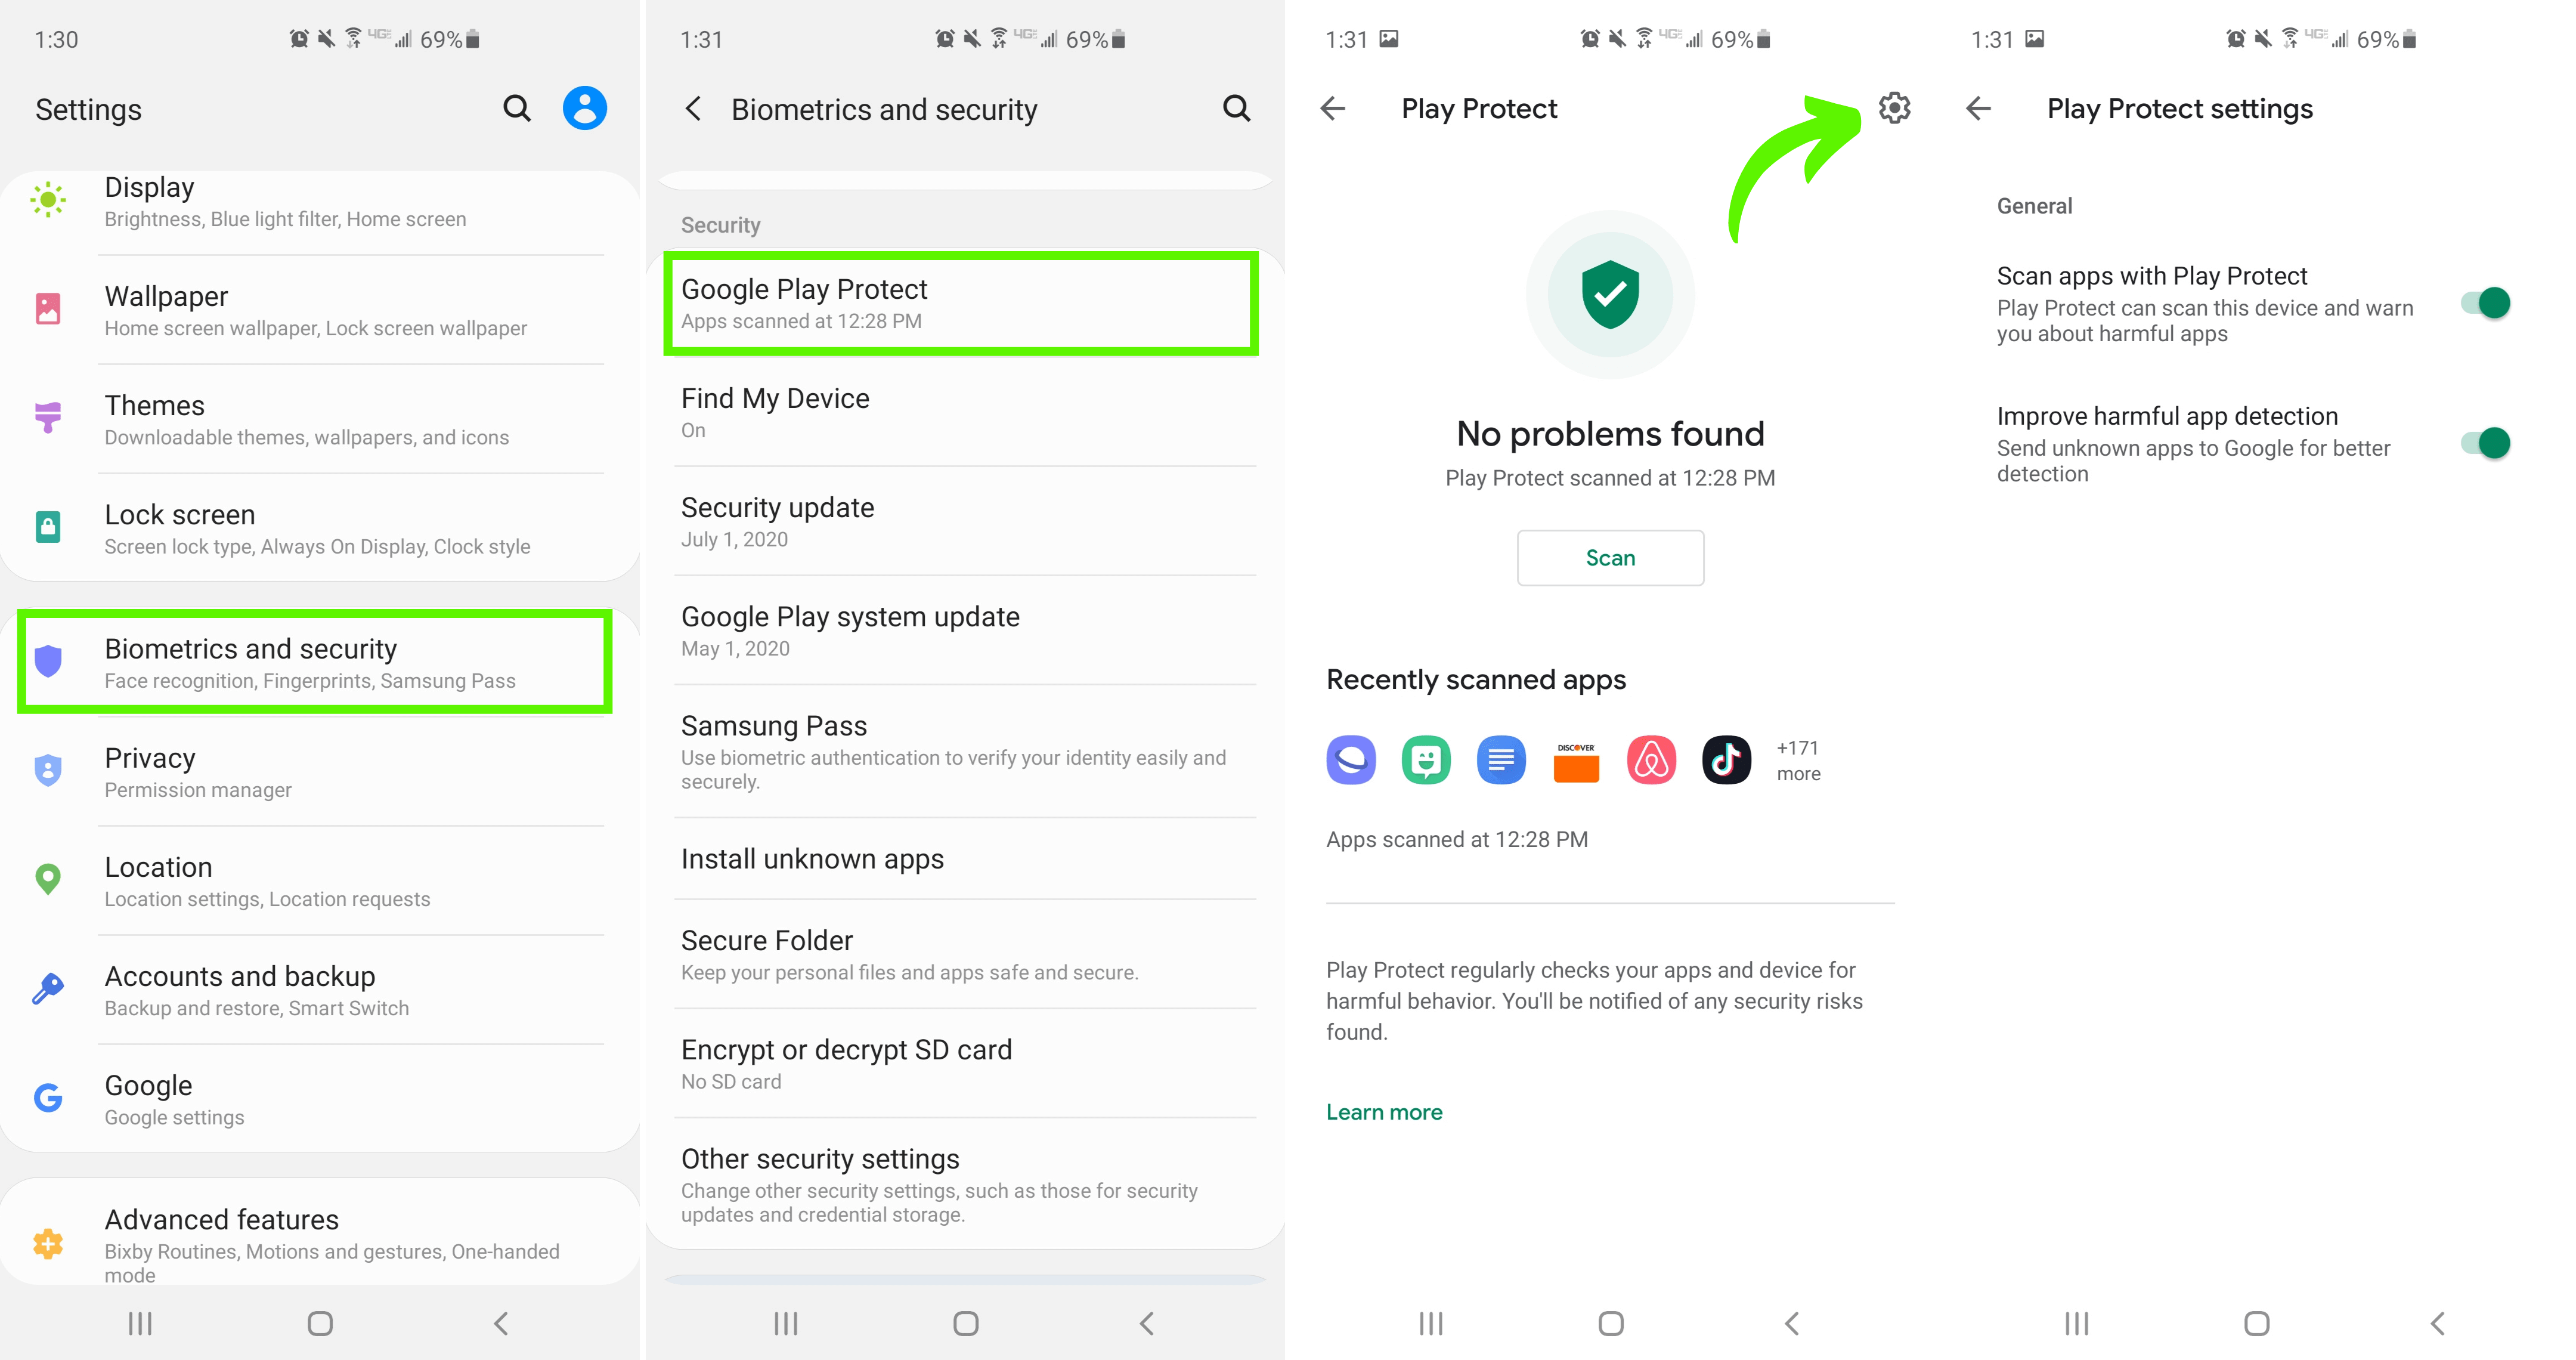 How to access Google Play Protect